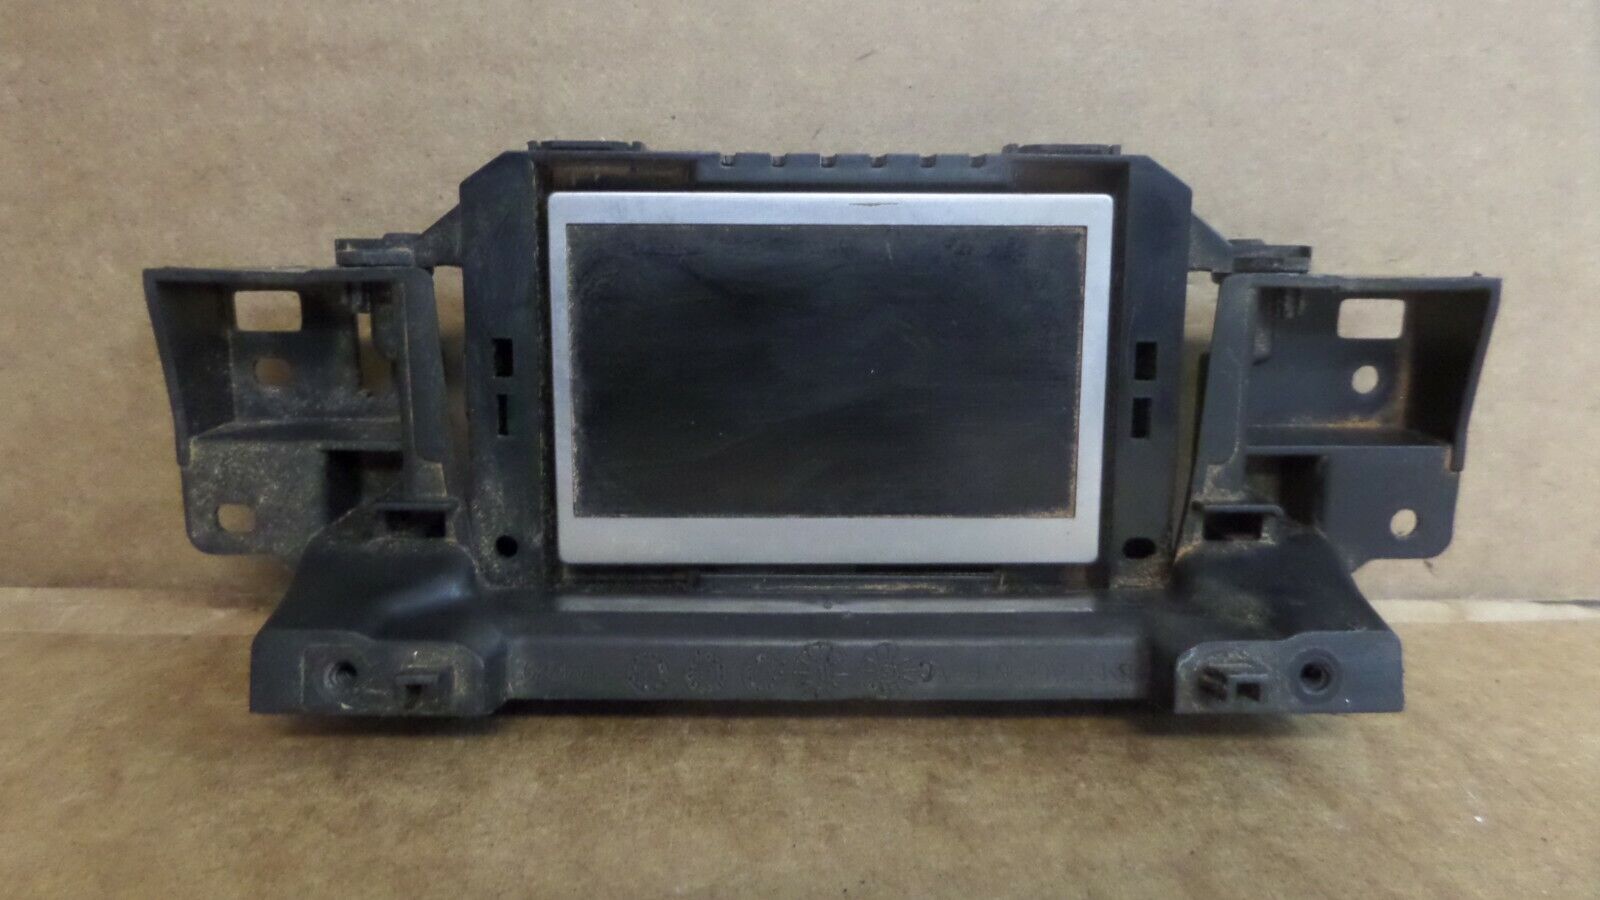 15-18 Ford Focus Radio Information Courier shipping free I Display Monitor Branded goods Dash Screen